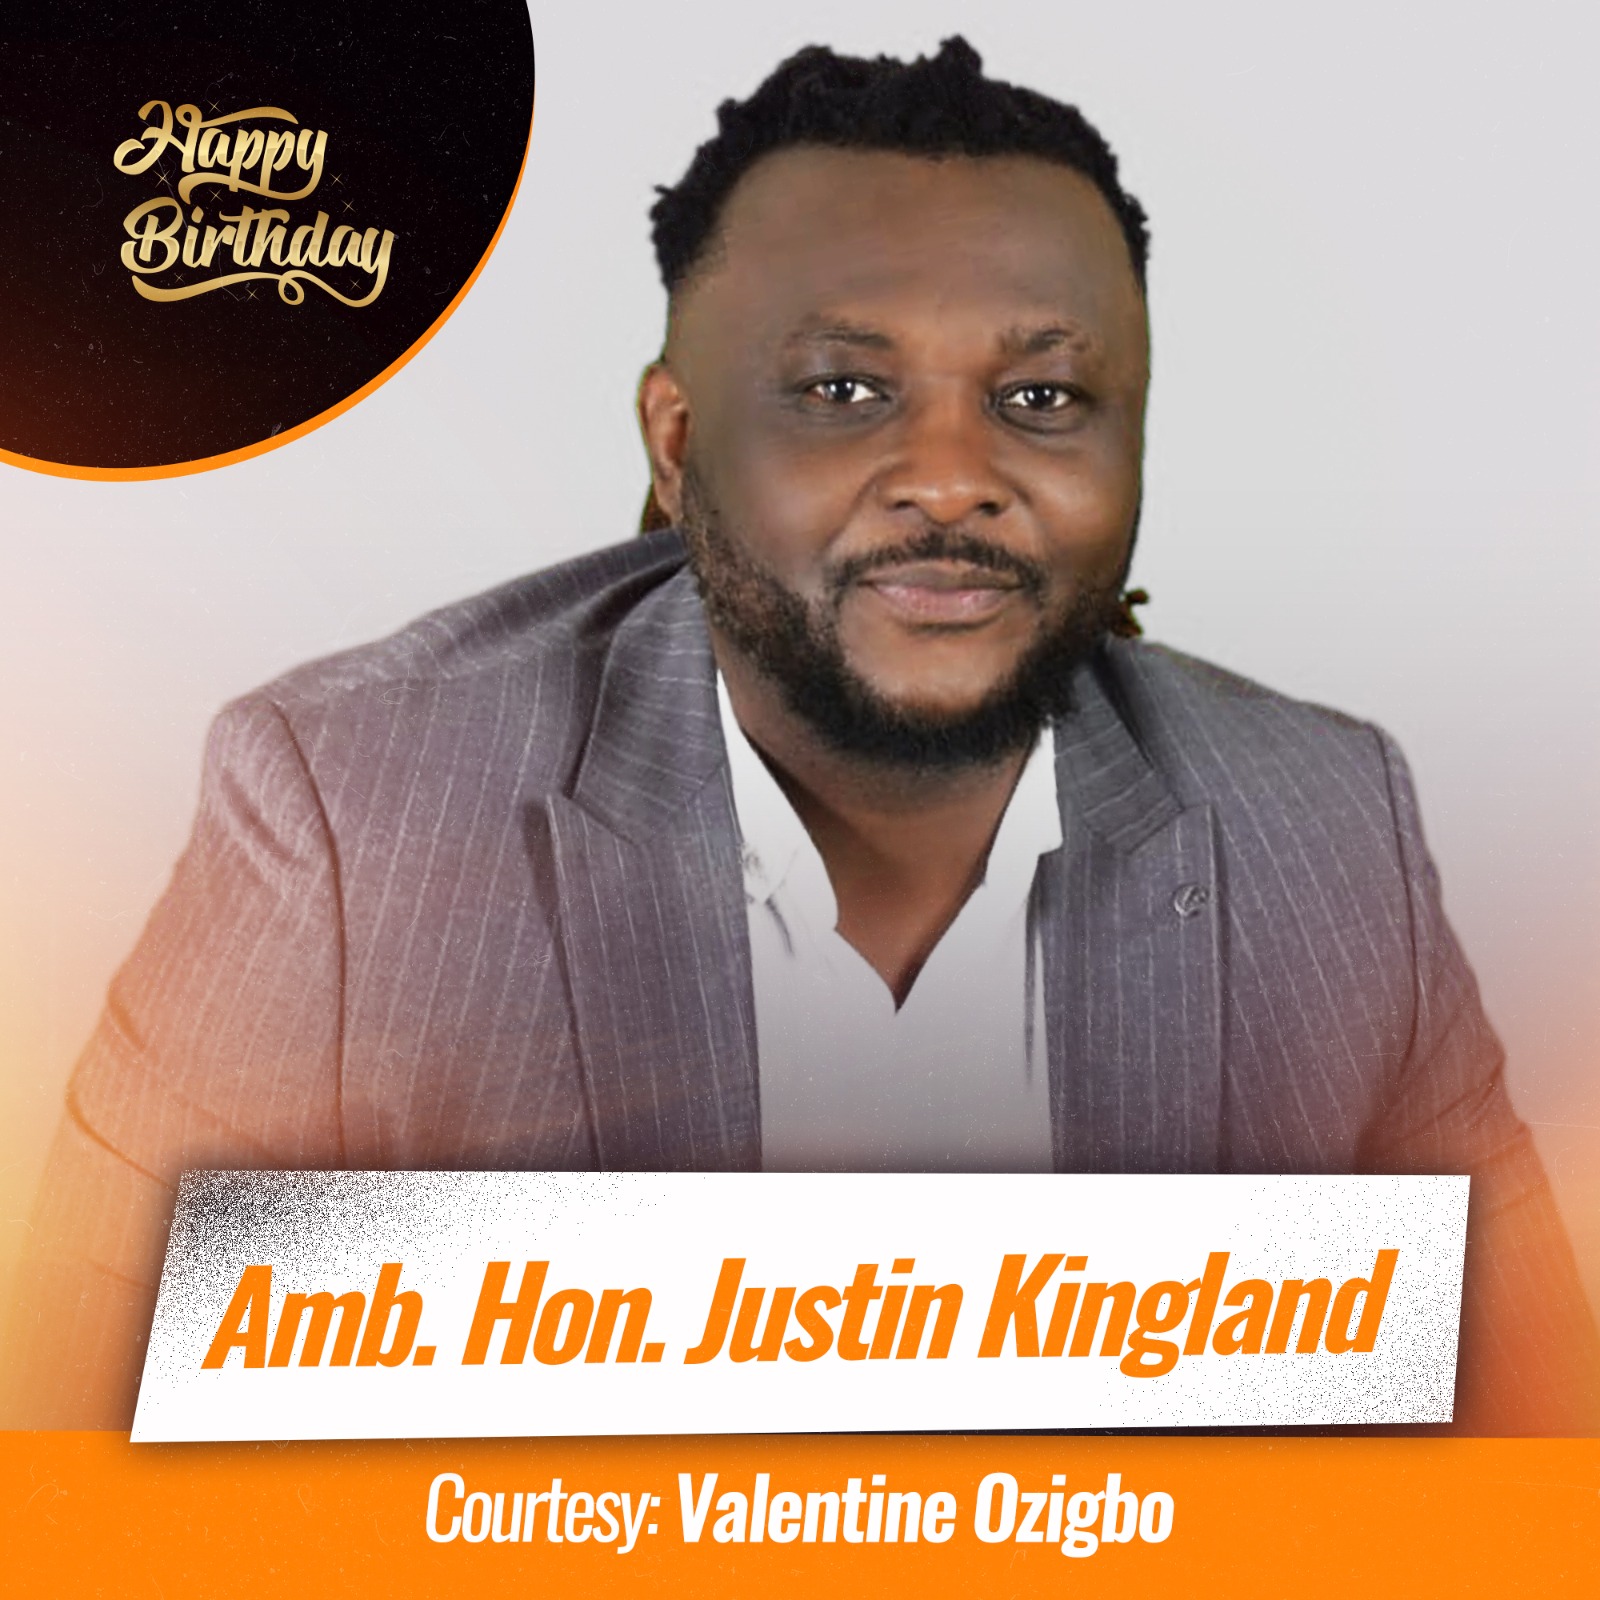 Today, I celebrate a good brother, an influential young politician, and one of my most committed allies, Amb. Hon. Justin Kingland, as he marks his birthday